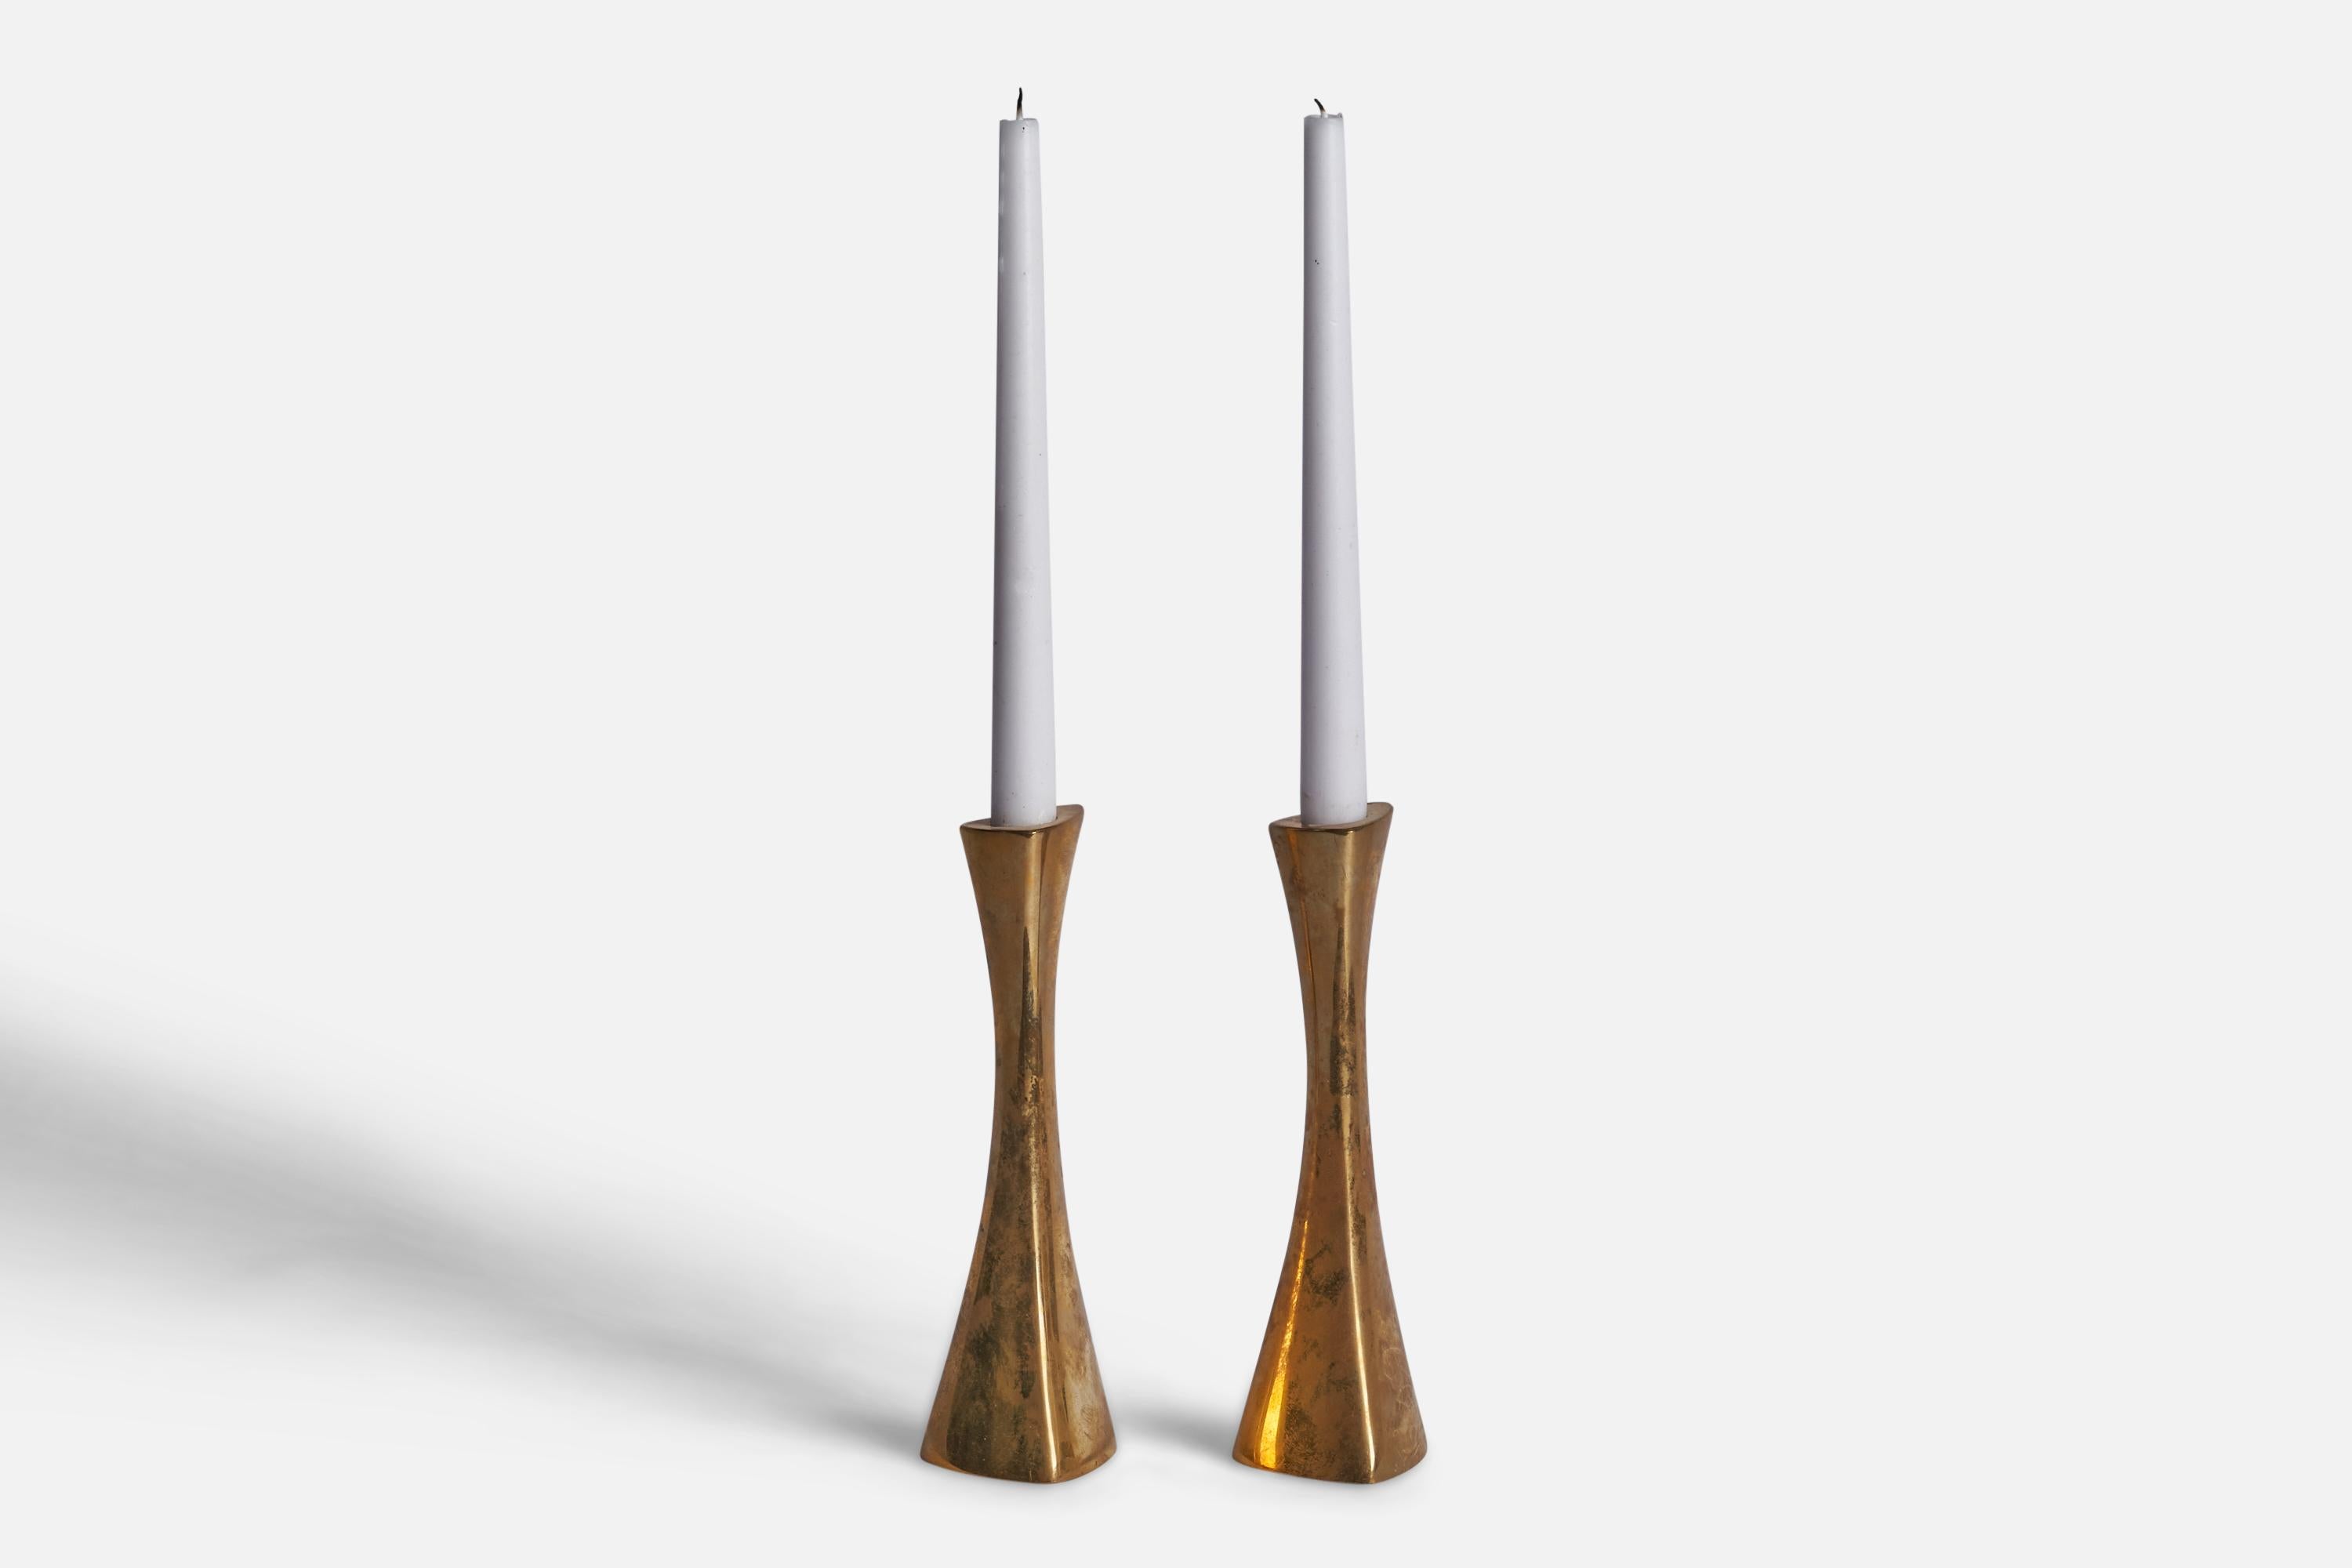 A pair of brass candlesticks designed by K-E Ytterberg and produced by BCA Eskilstuna, Sweden, 1960s.

Fits 0.75” diameter candles